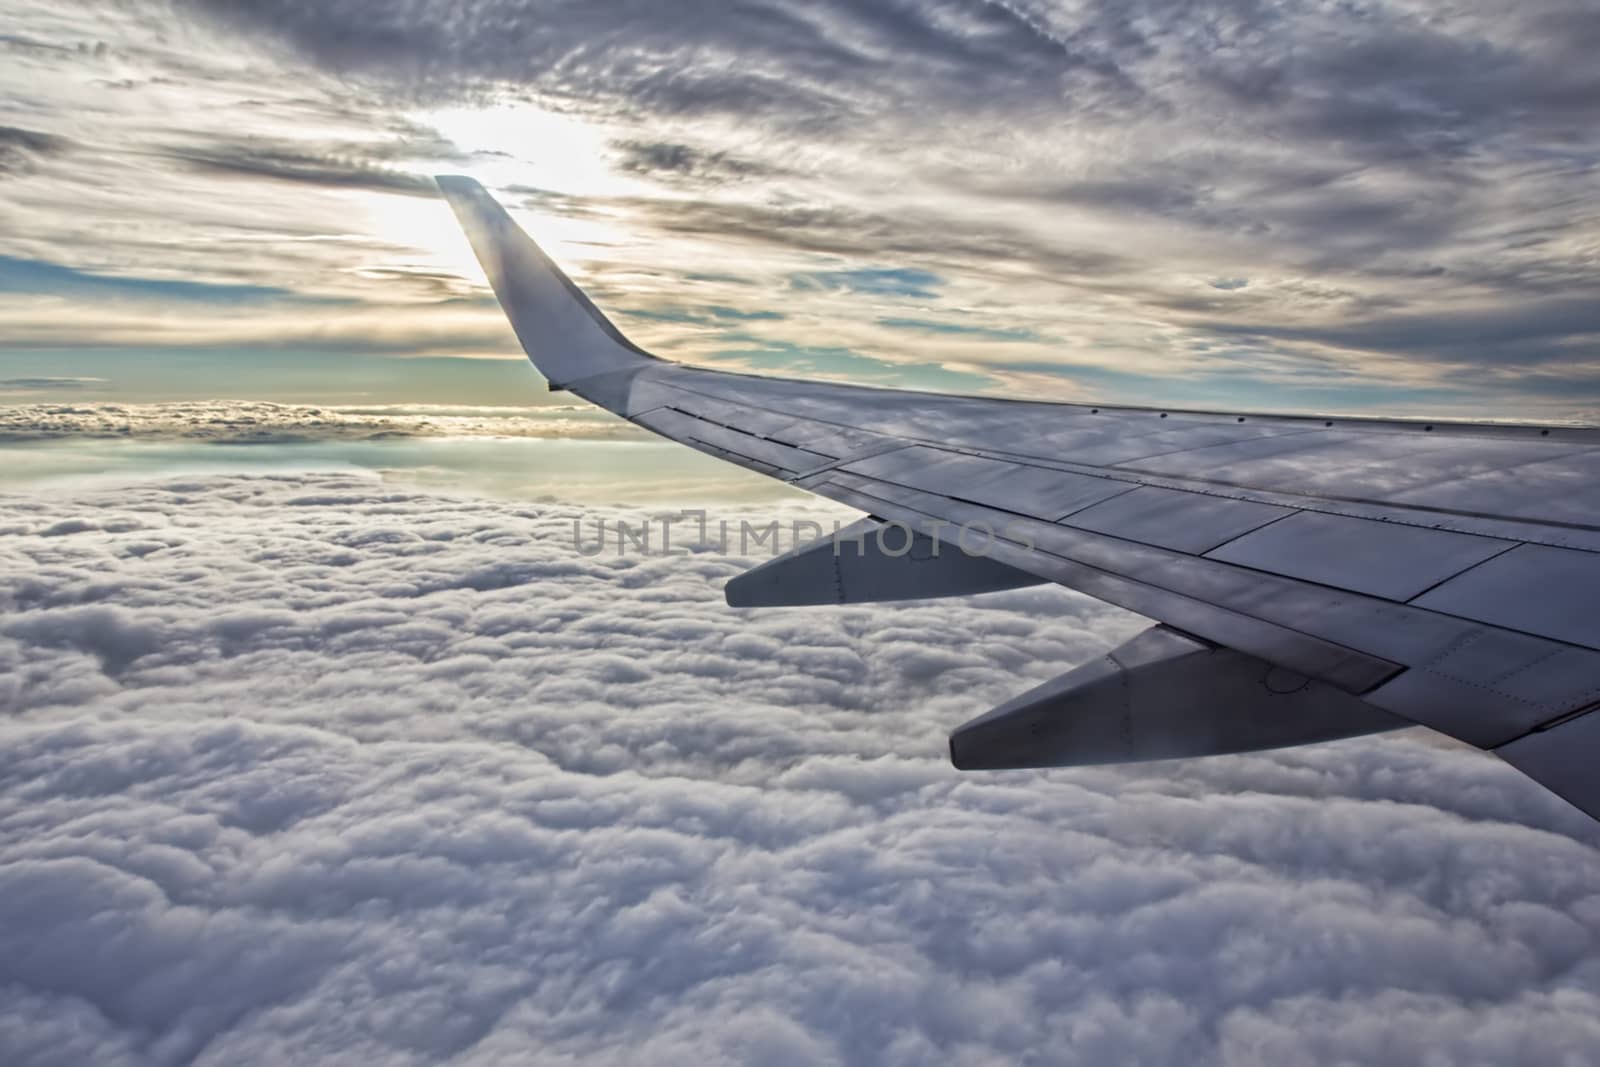 Sunset, cloudy sky and airplane wing as seen through window of an aircraft.